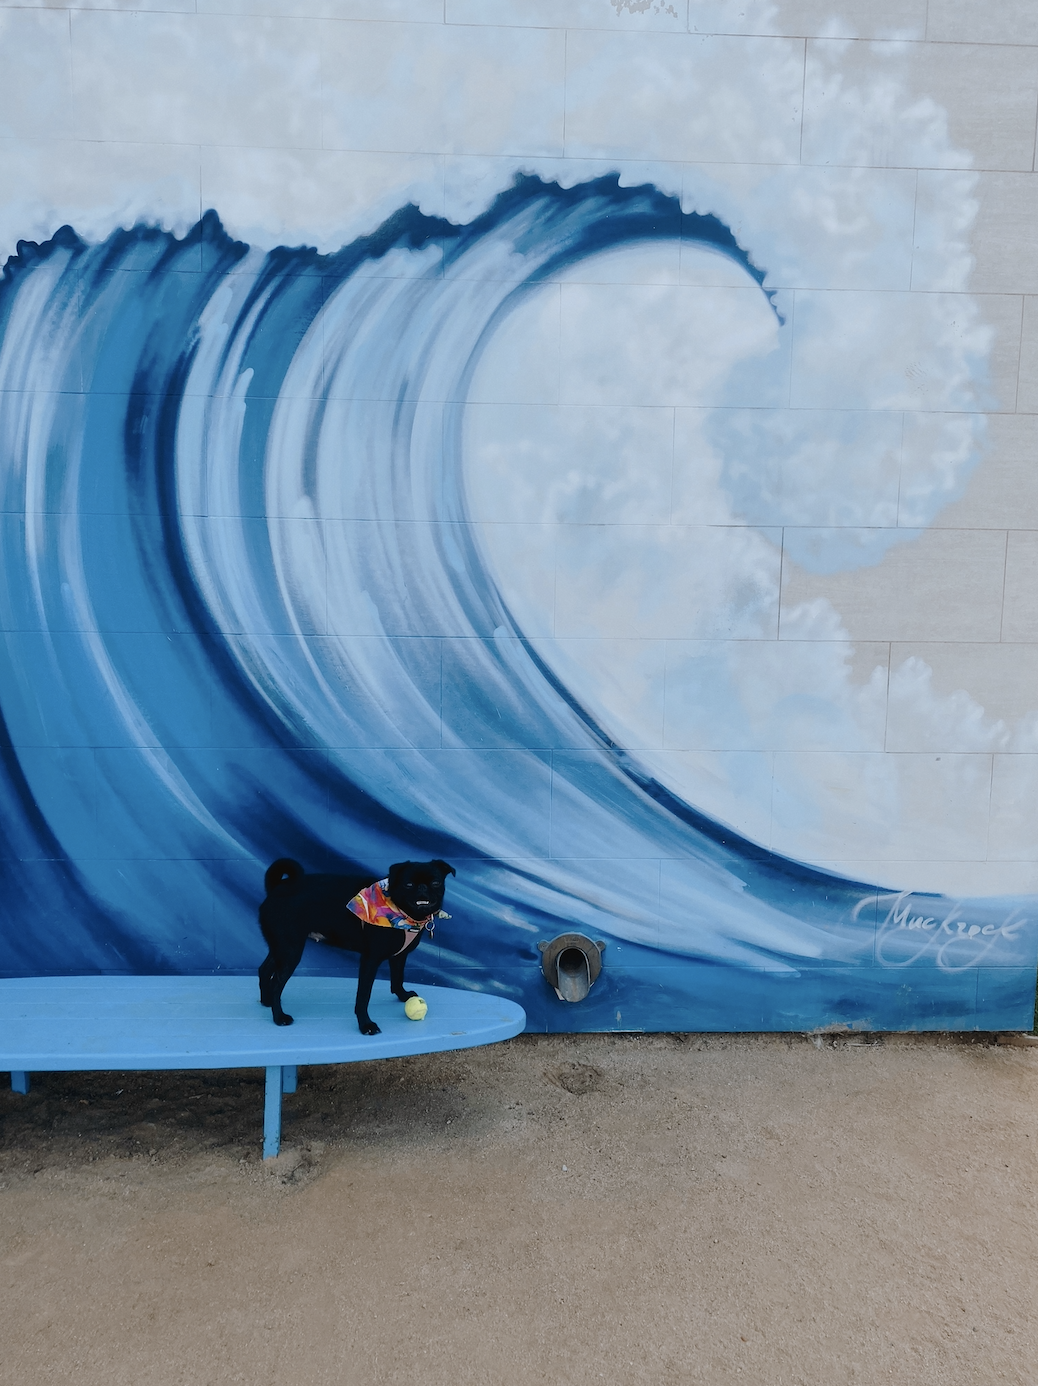 Phoebe standing on a surfboard in front of a mural of a wave